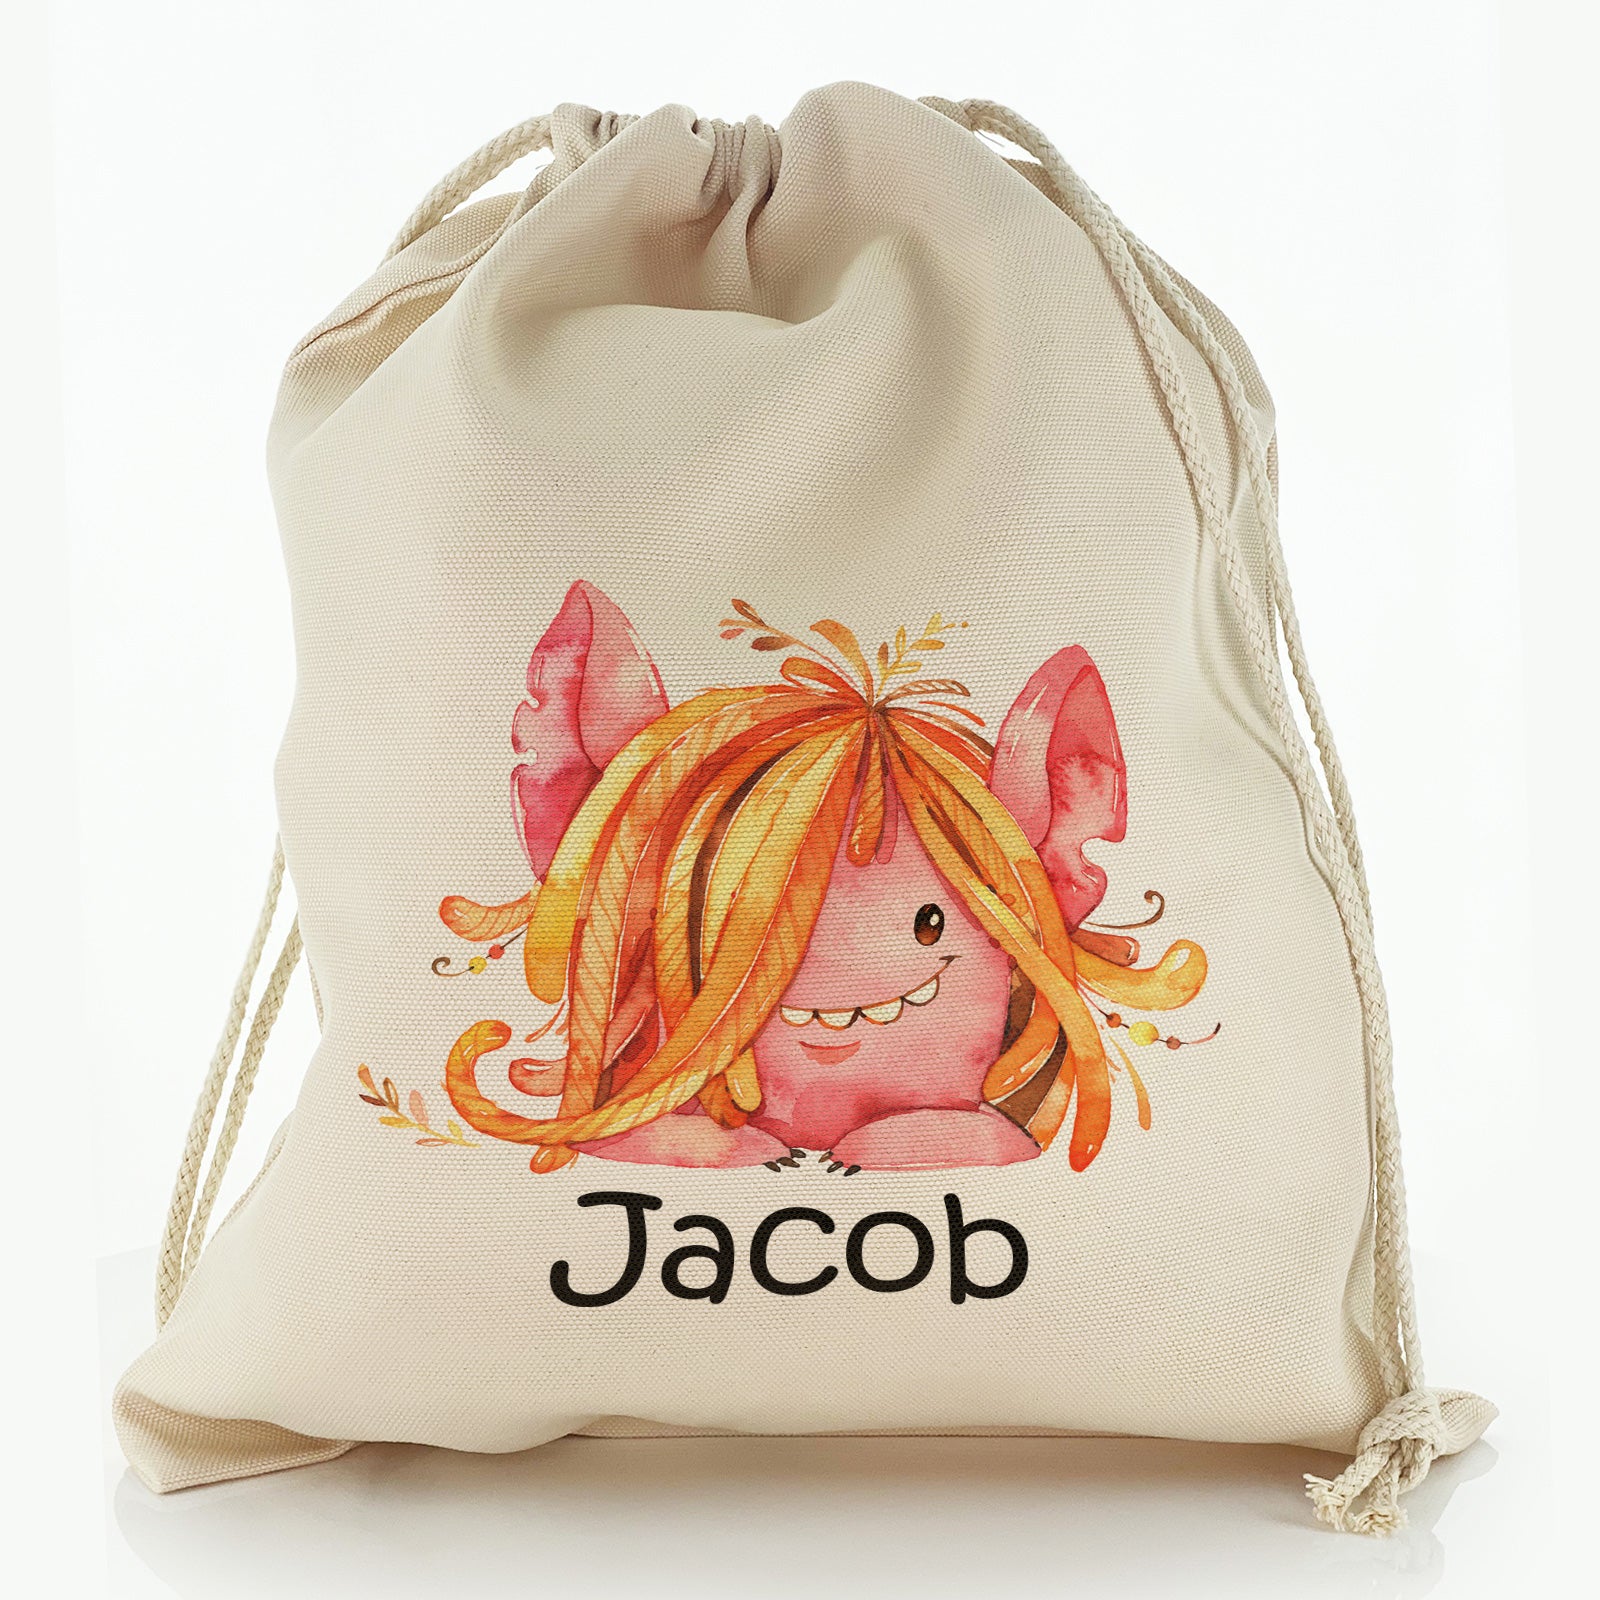 Personalised Canvas Sack with Childish Text and Hairy Red Monster